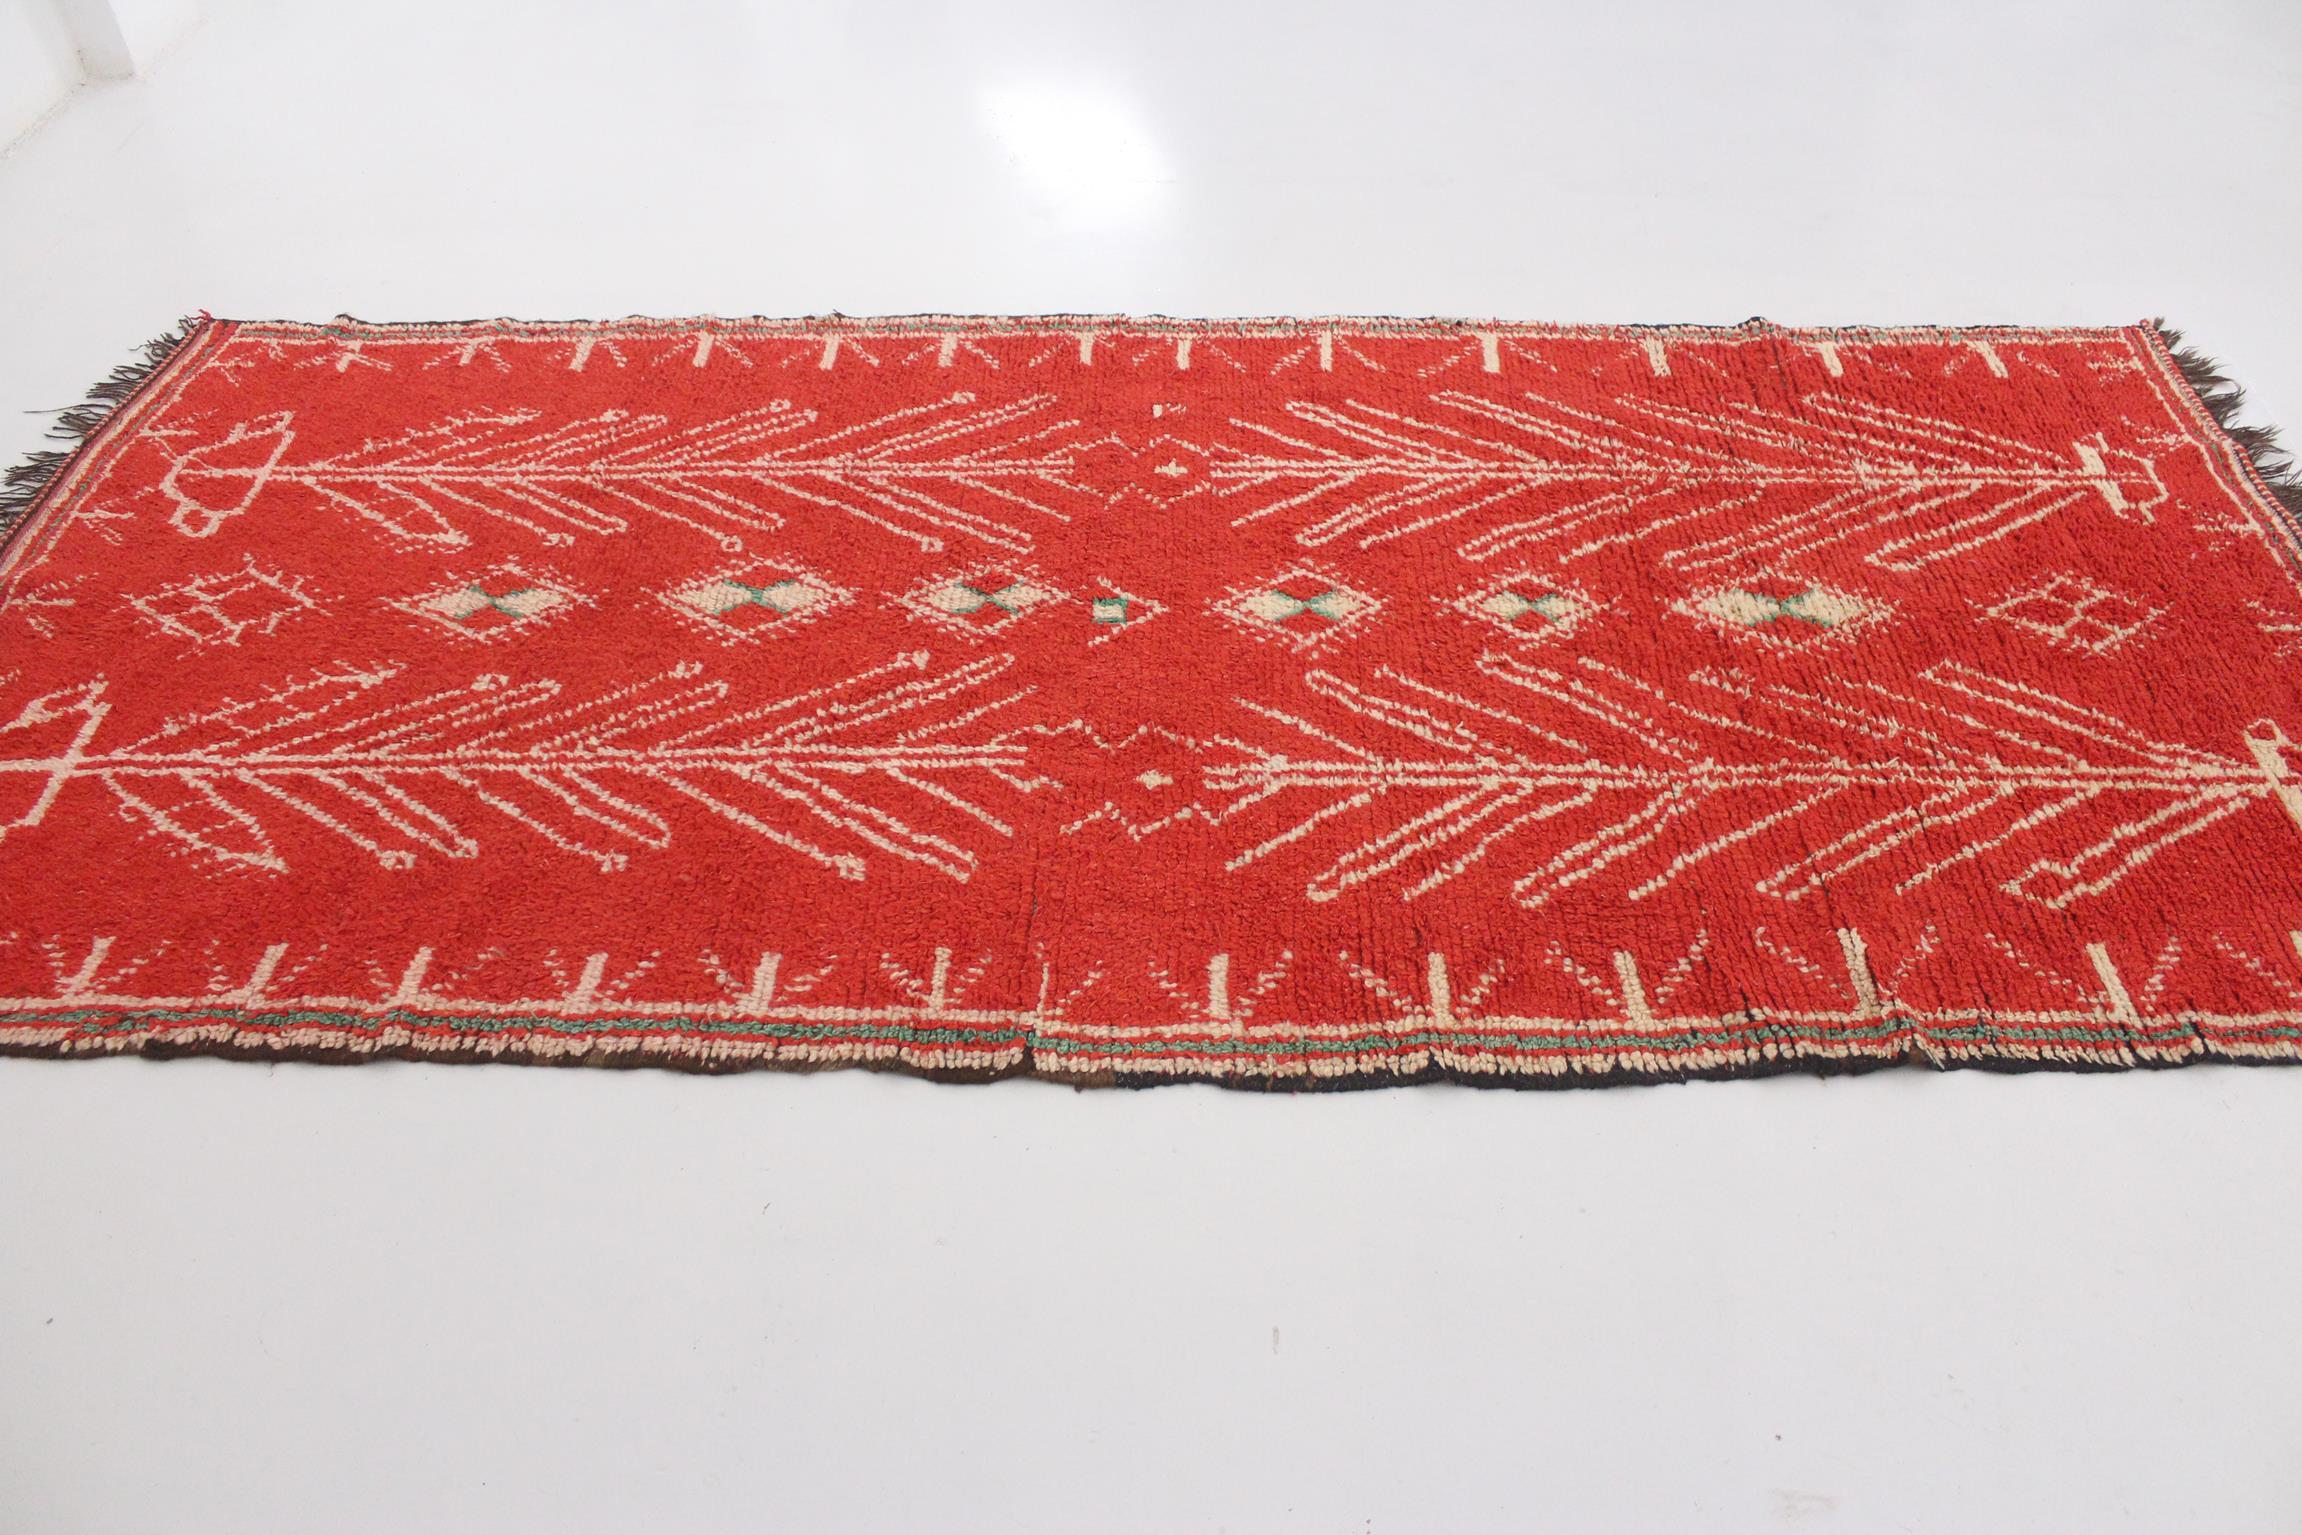 Hand-Woven Vintage Moroccan Azilal rug - Red - 4.8x10.7feet / 148x328cm For Sale